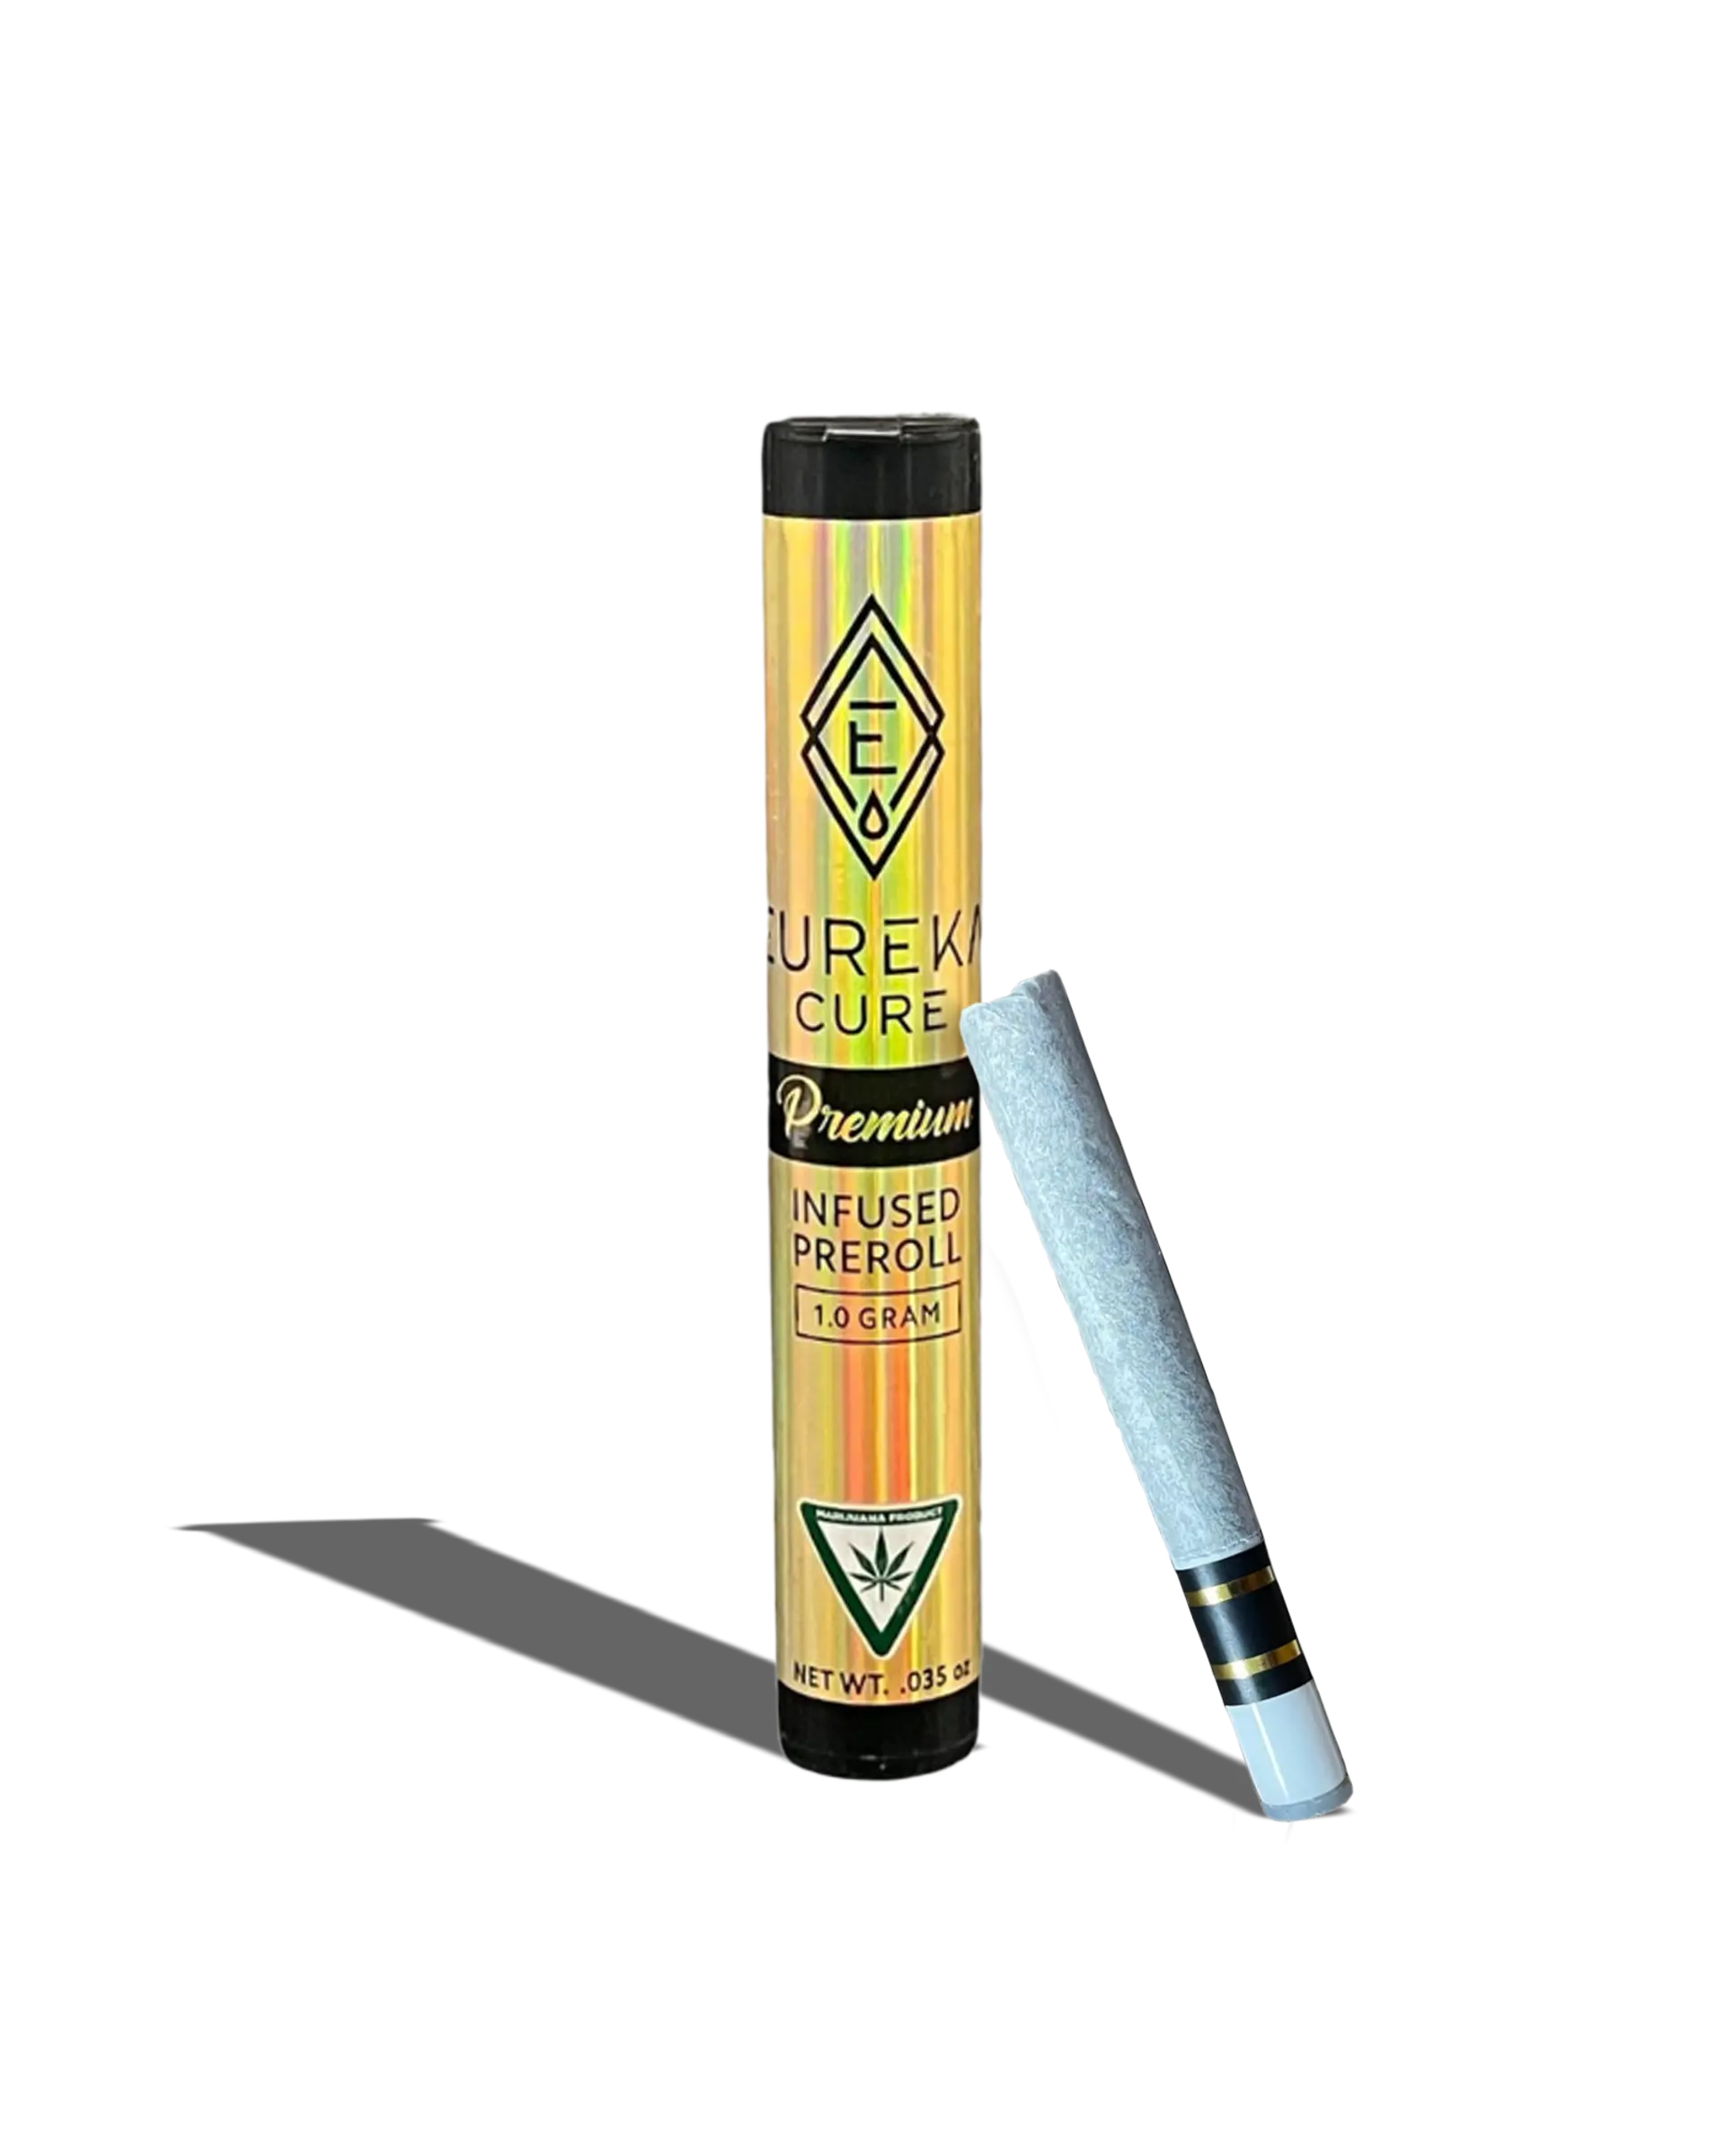 Garlic Icing X Eggroll Live Resin Infused Preroll 1g, 1 of 1